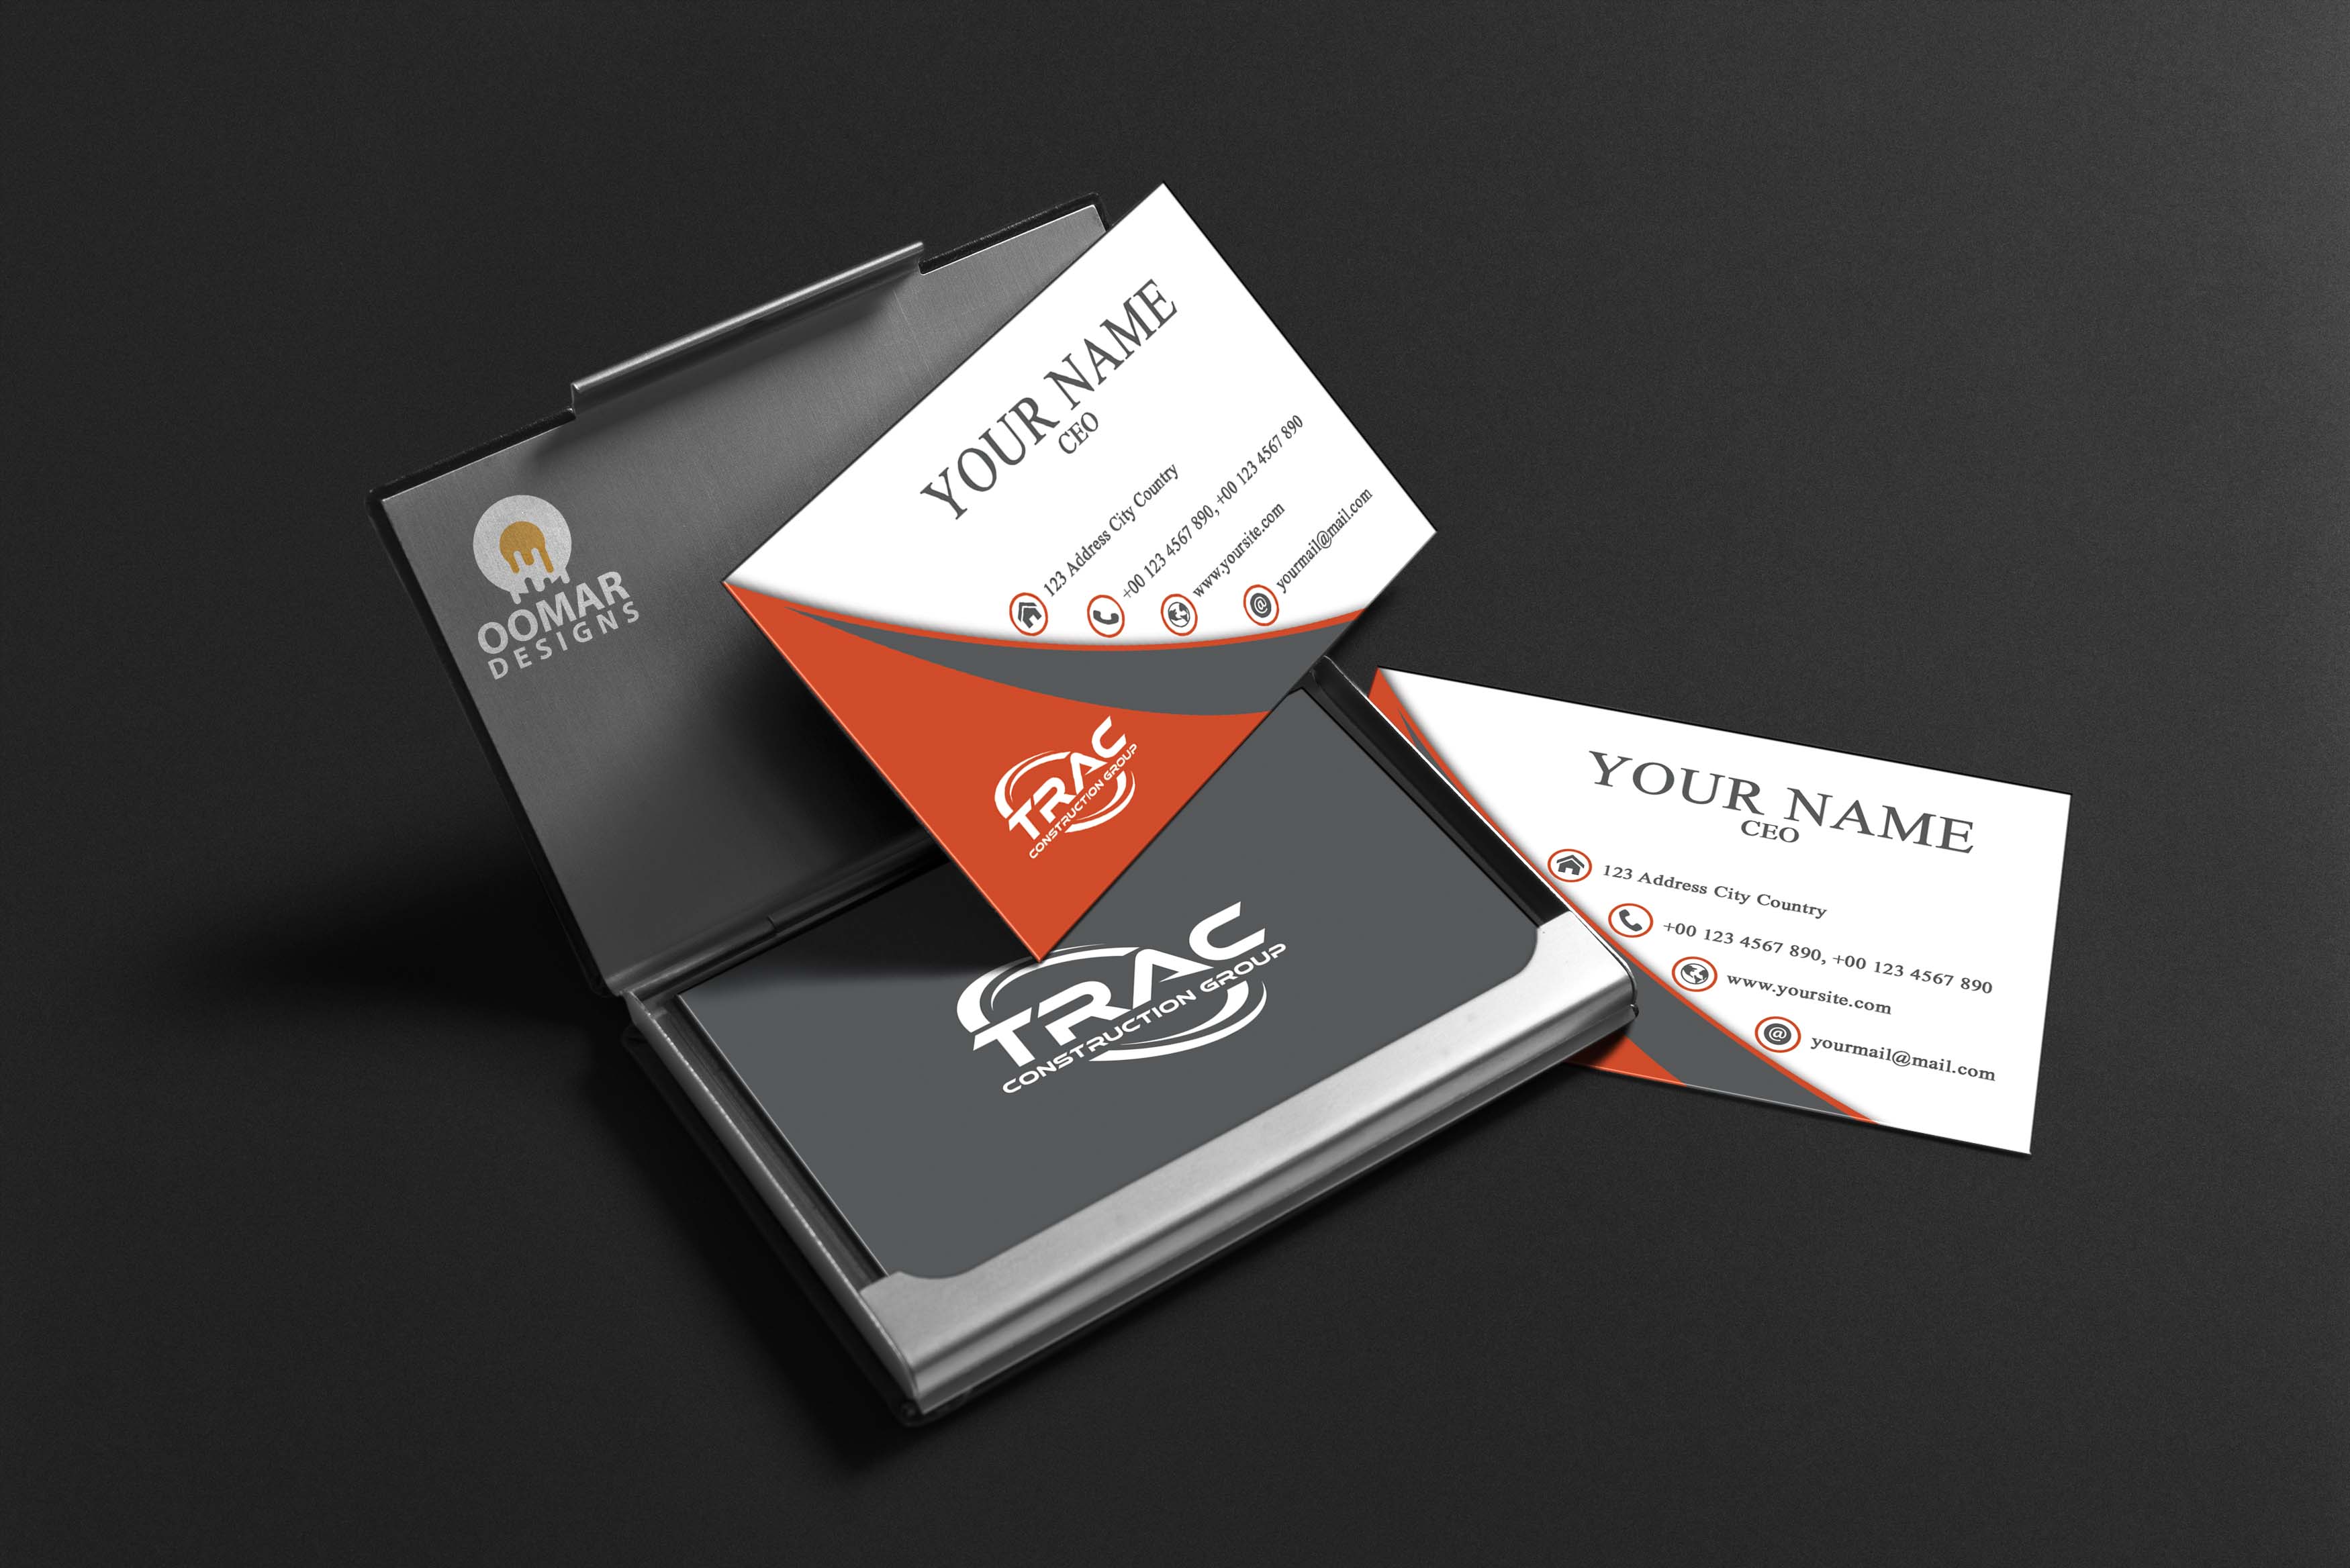 design-a-professional-double-sided-business-card-for-you-for-10-seoclerks